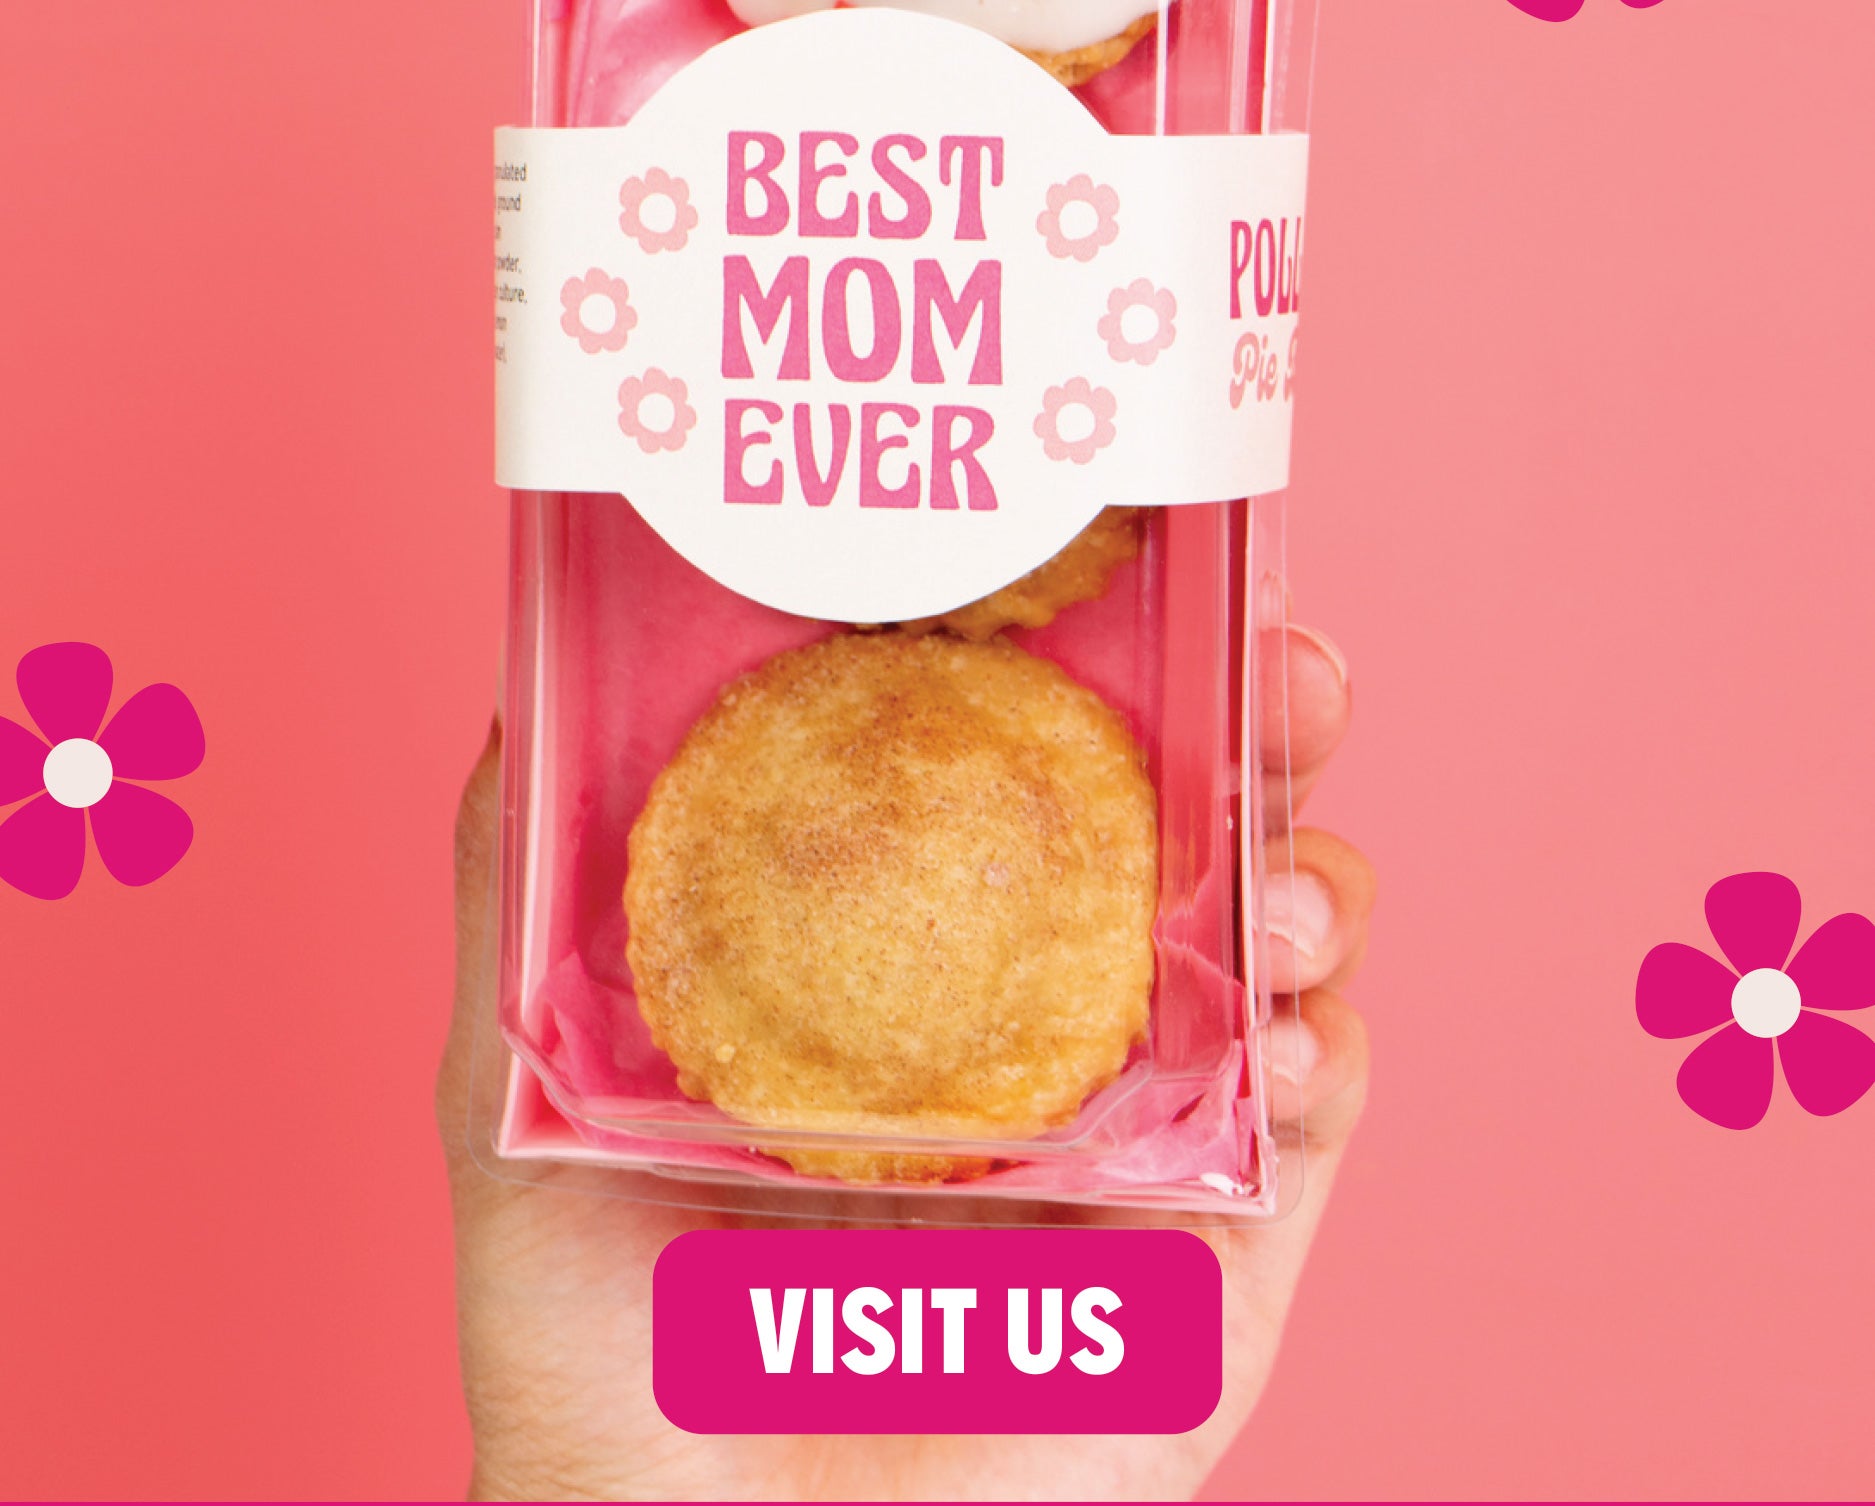 Visit us! Get a last minute gift for mom!